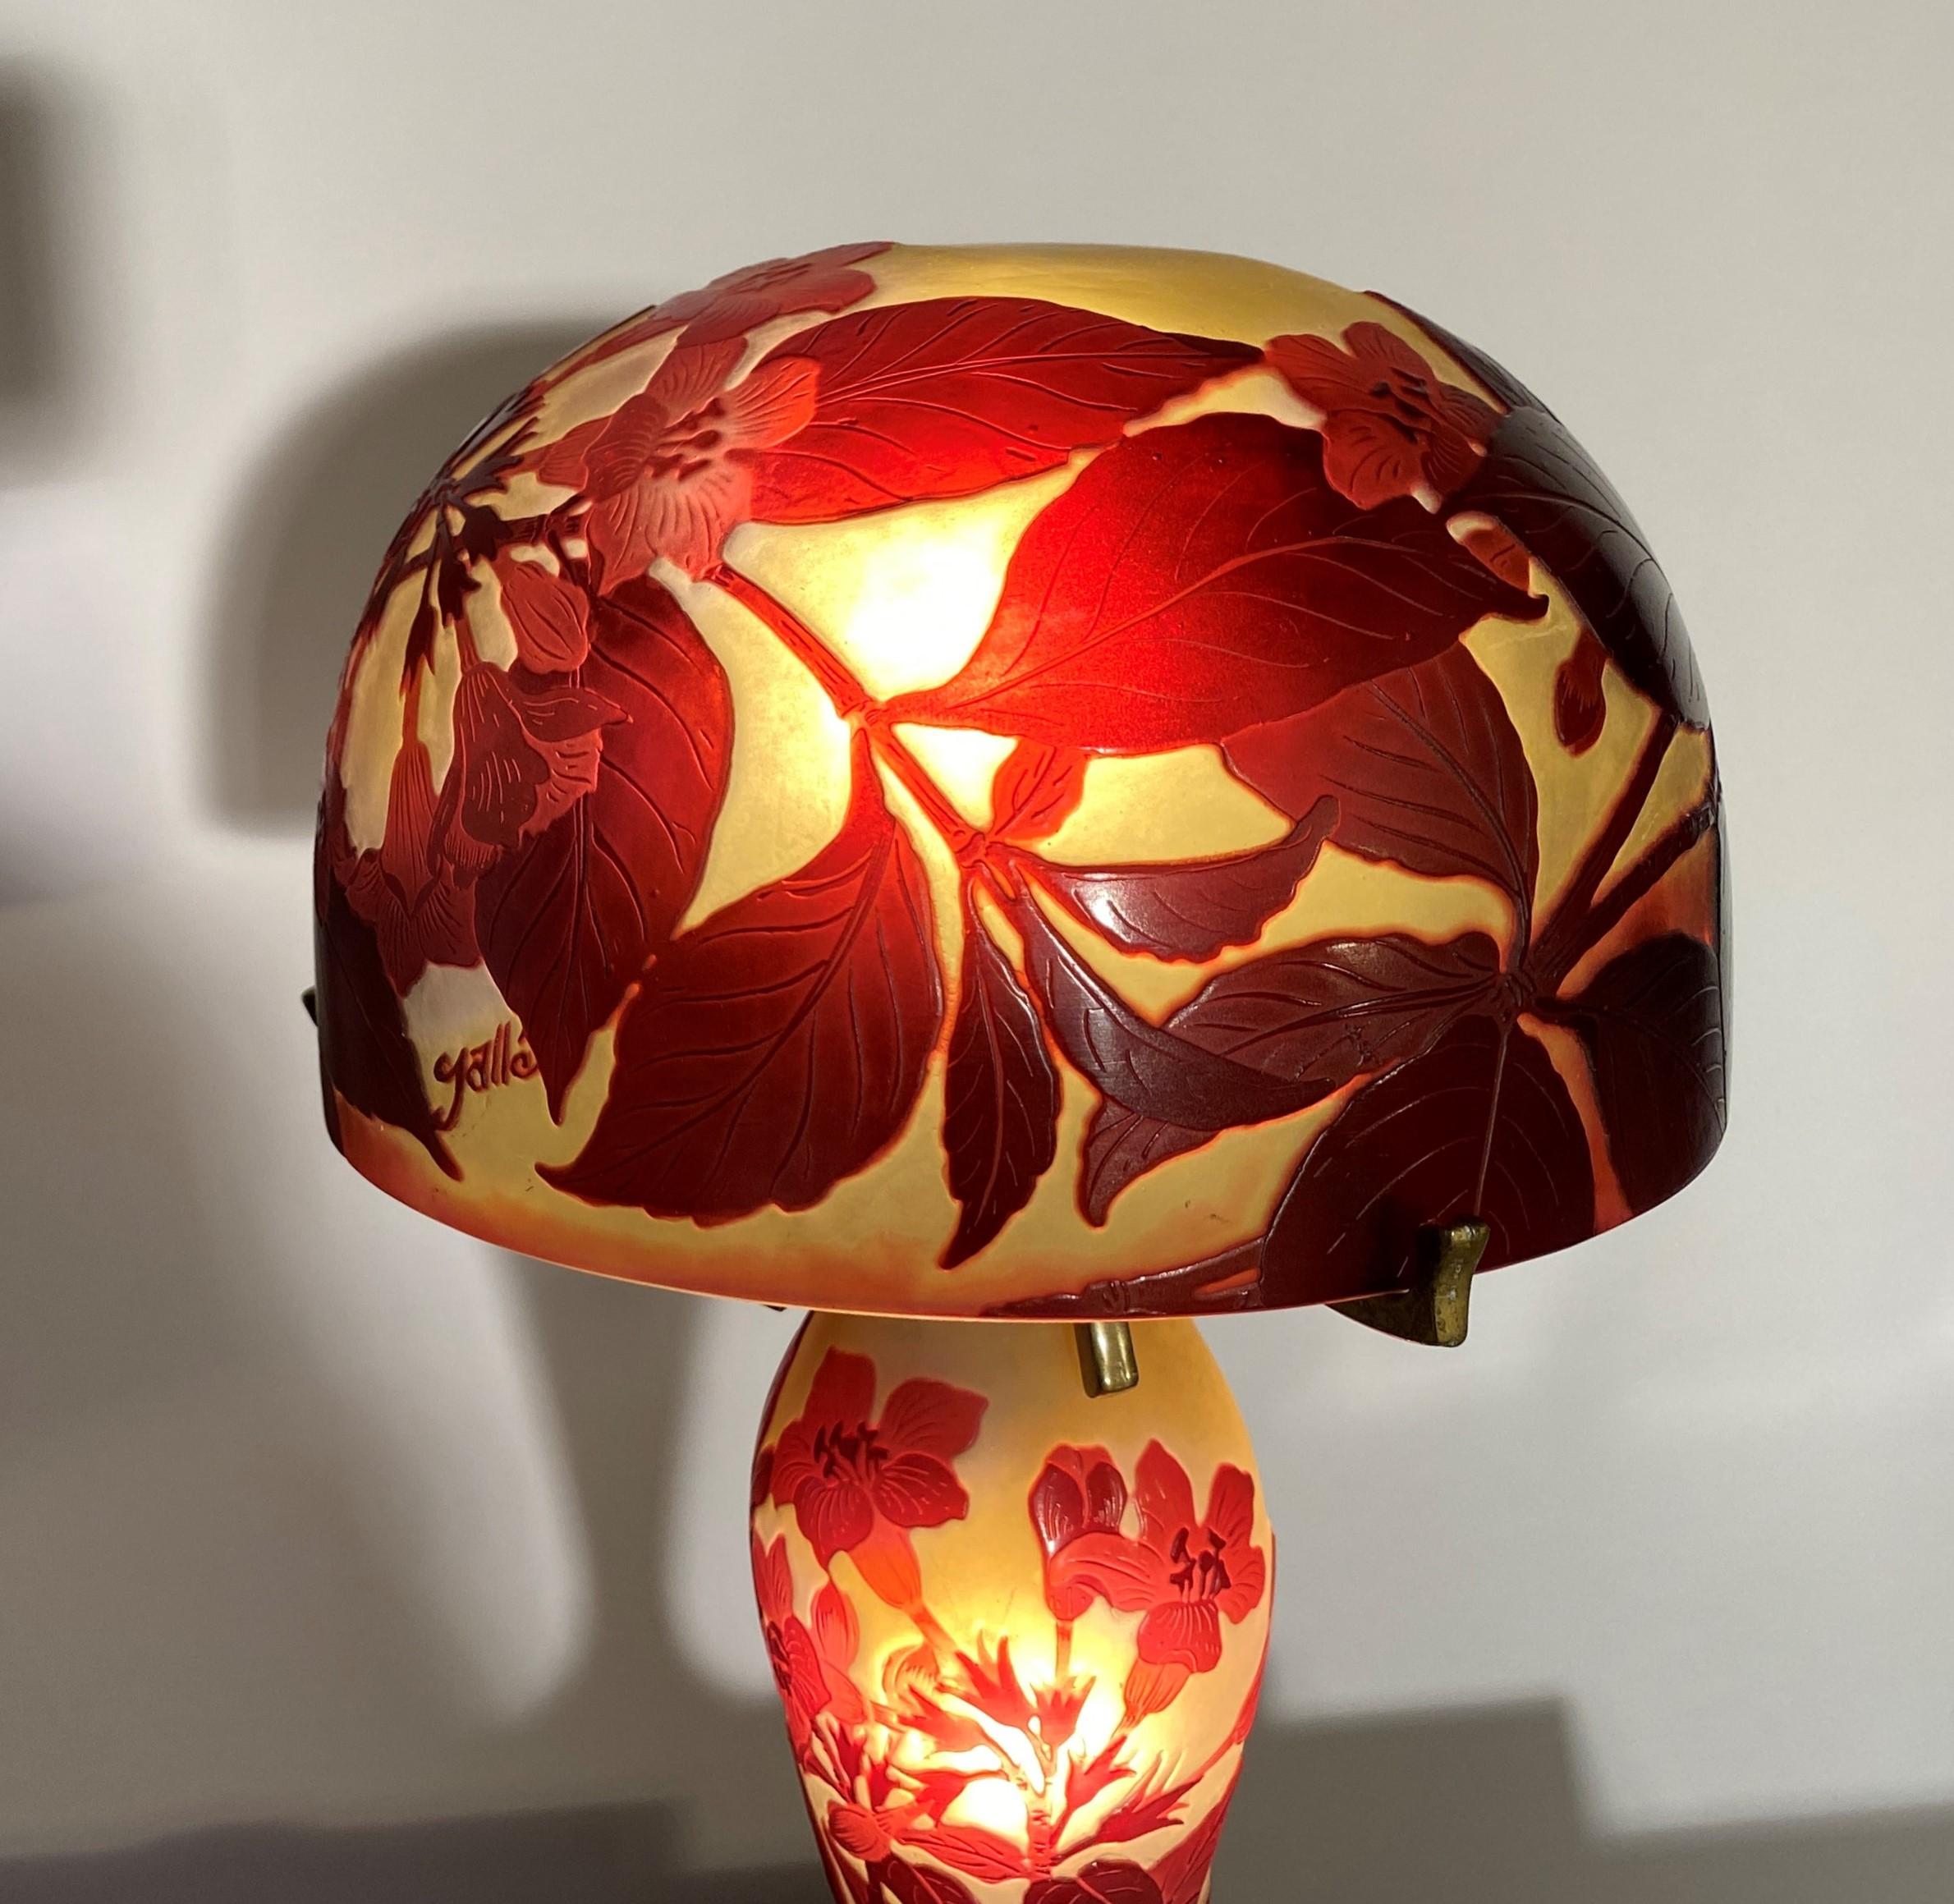 Art Deco 'Mushroom' Lamp In Multi-Layer Glass With Flower Decor  Emile Gallé For Sale